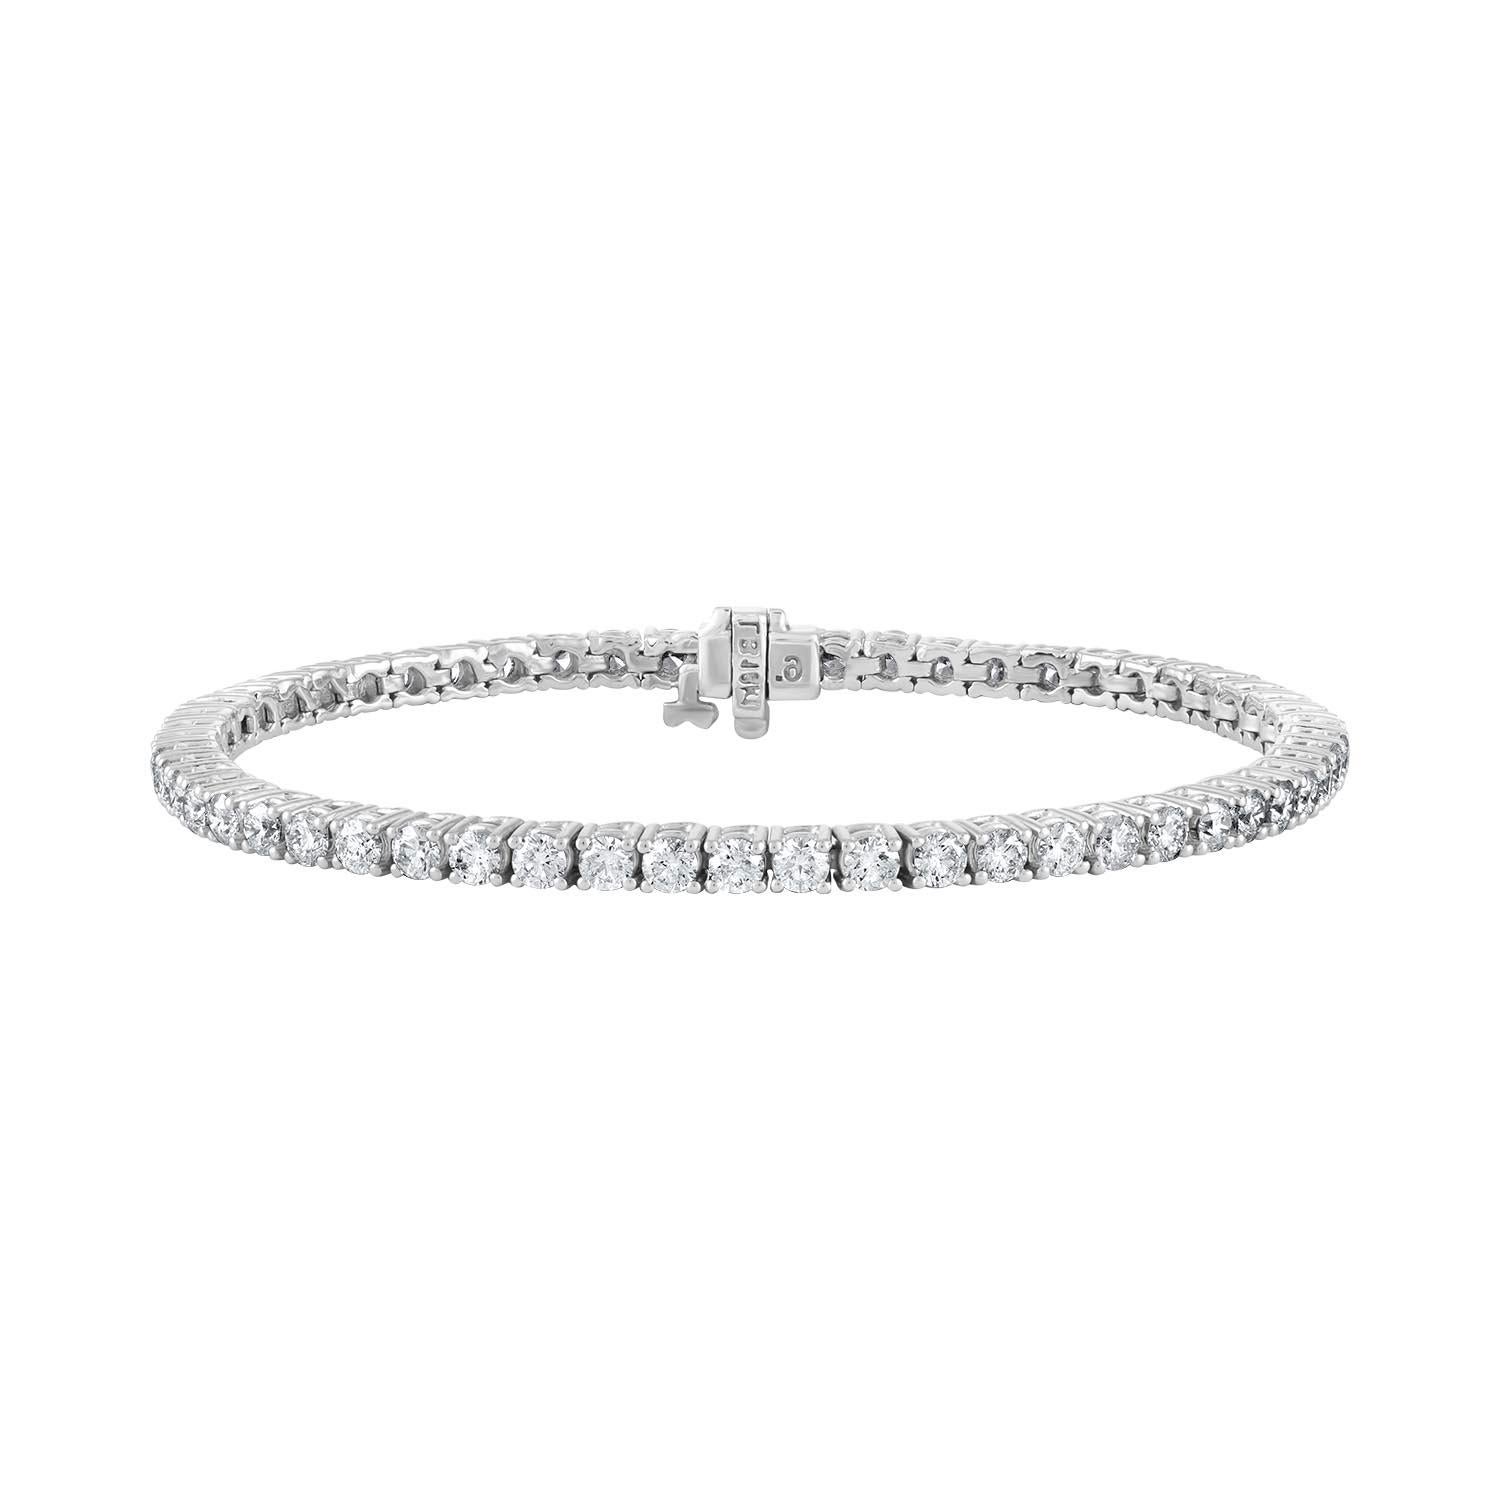 14kt white gold tennis bracelet featuring 2.00 cts tw of round diamonds in a 4 prong setting GH SI
Diana M. is a leading supplier of top-quality fine jewelry for over 35 years.
Diana M is one-stop shop for all your jewelry shopping, carrying line of